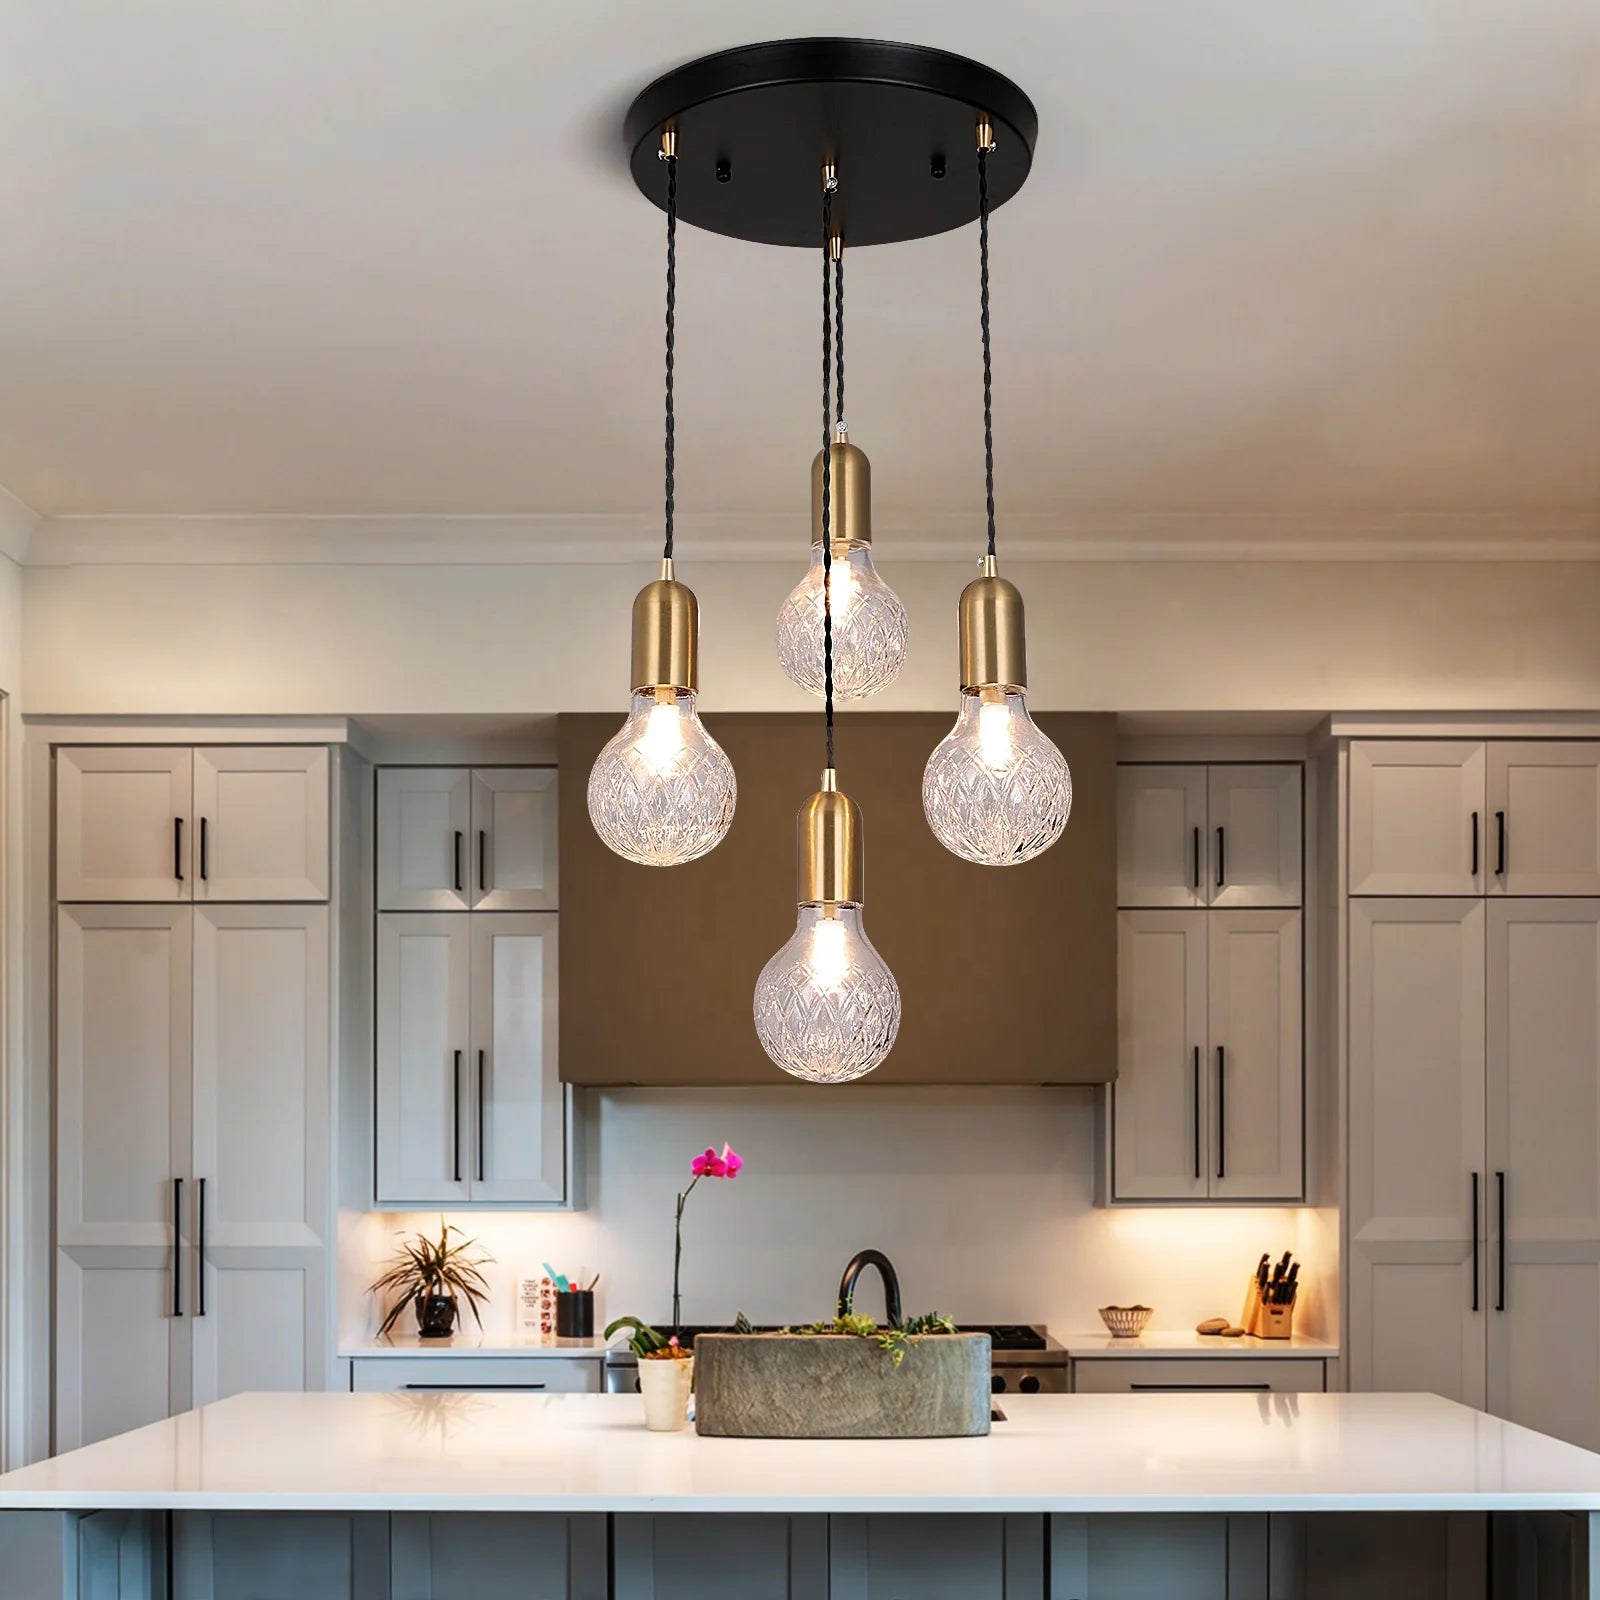 G9 Pendant Light With Hanging Crystals Kitchen